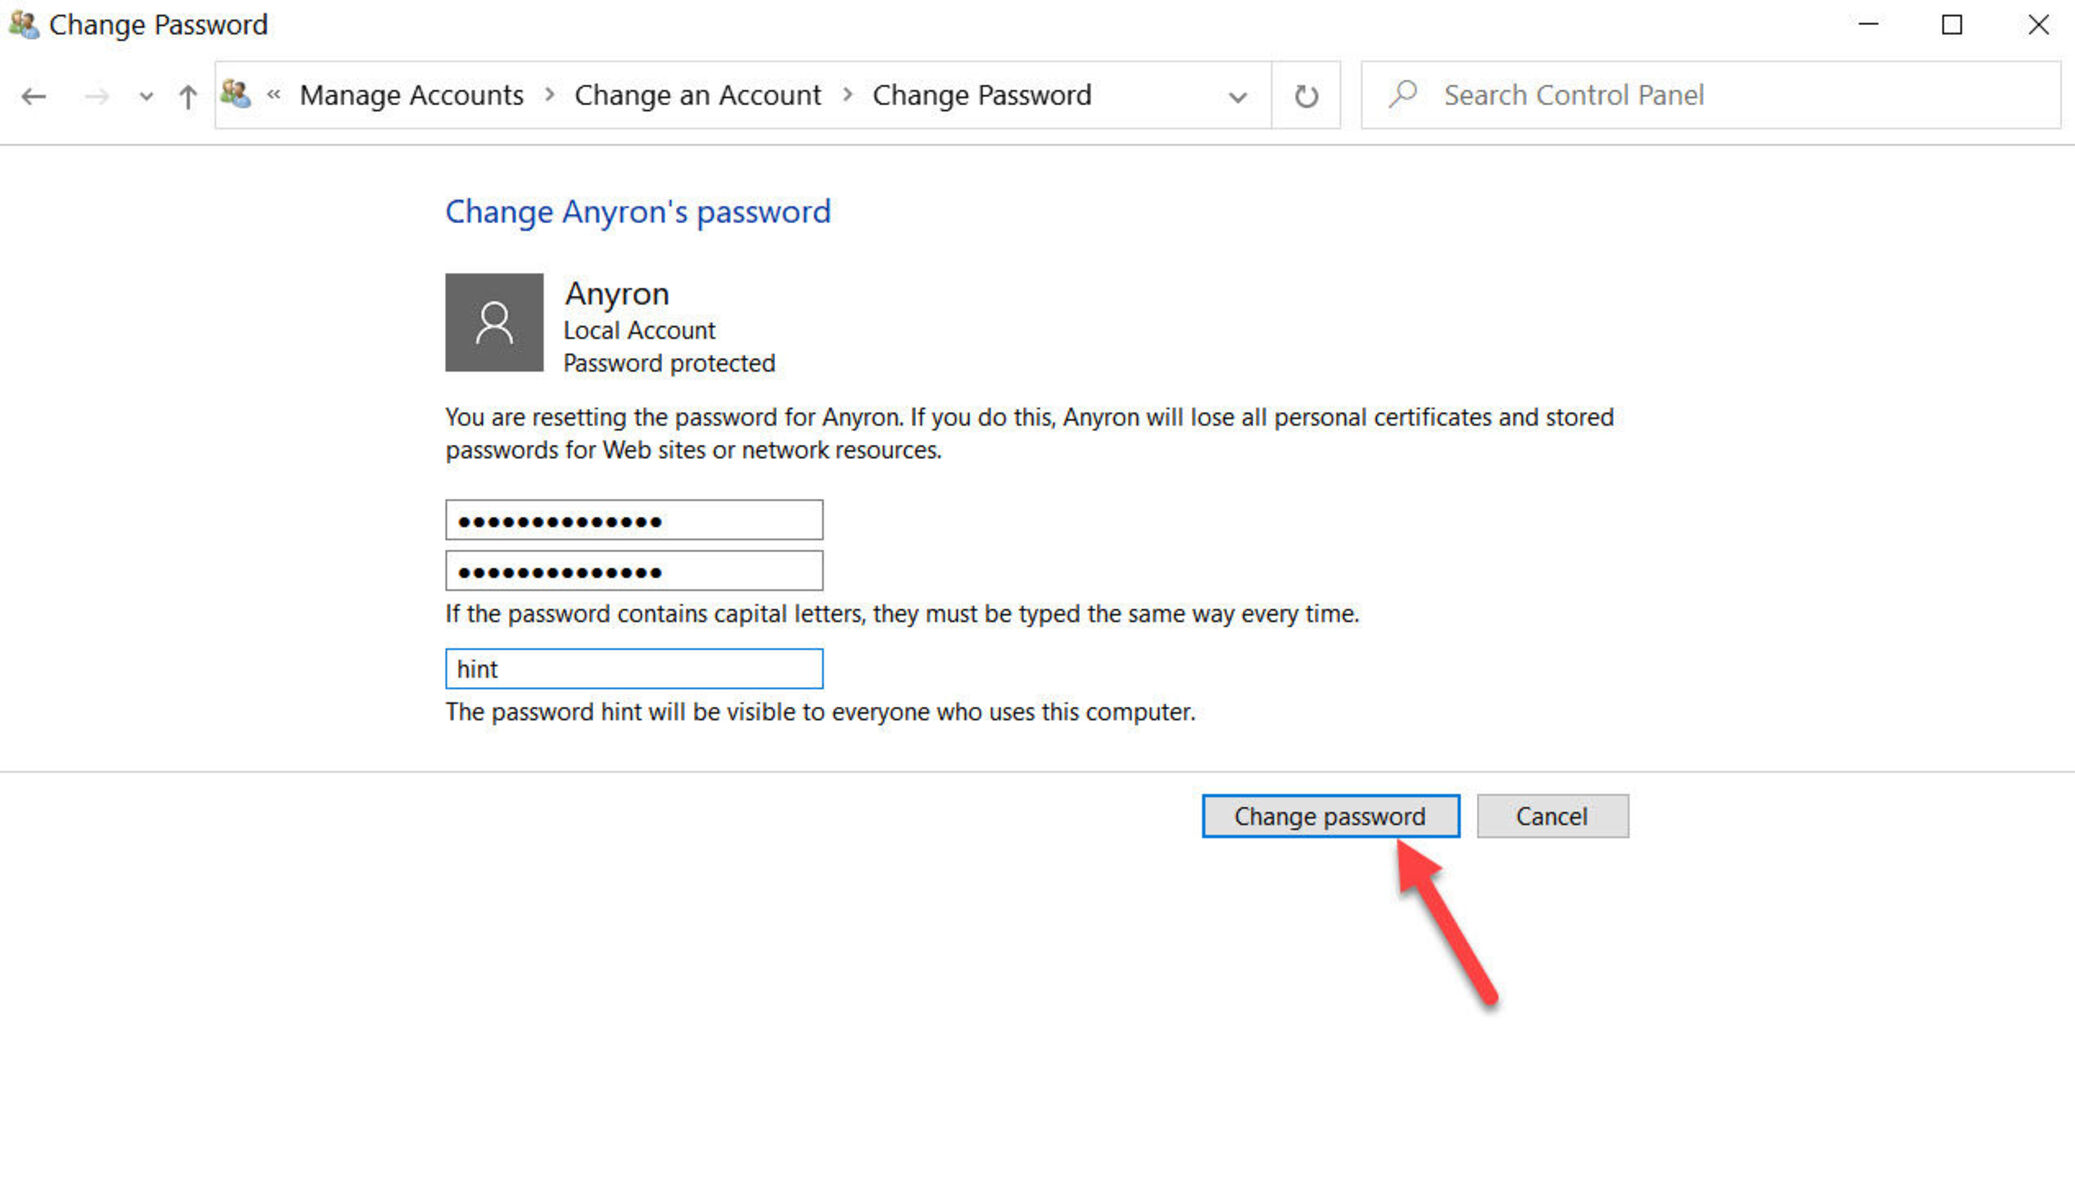 How To Change Another User’s Password In Windows